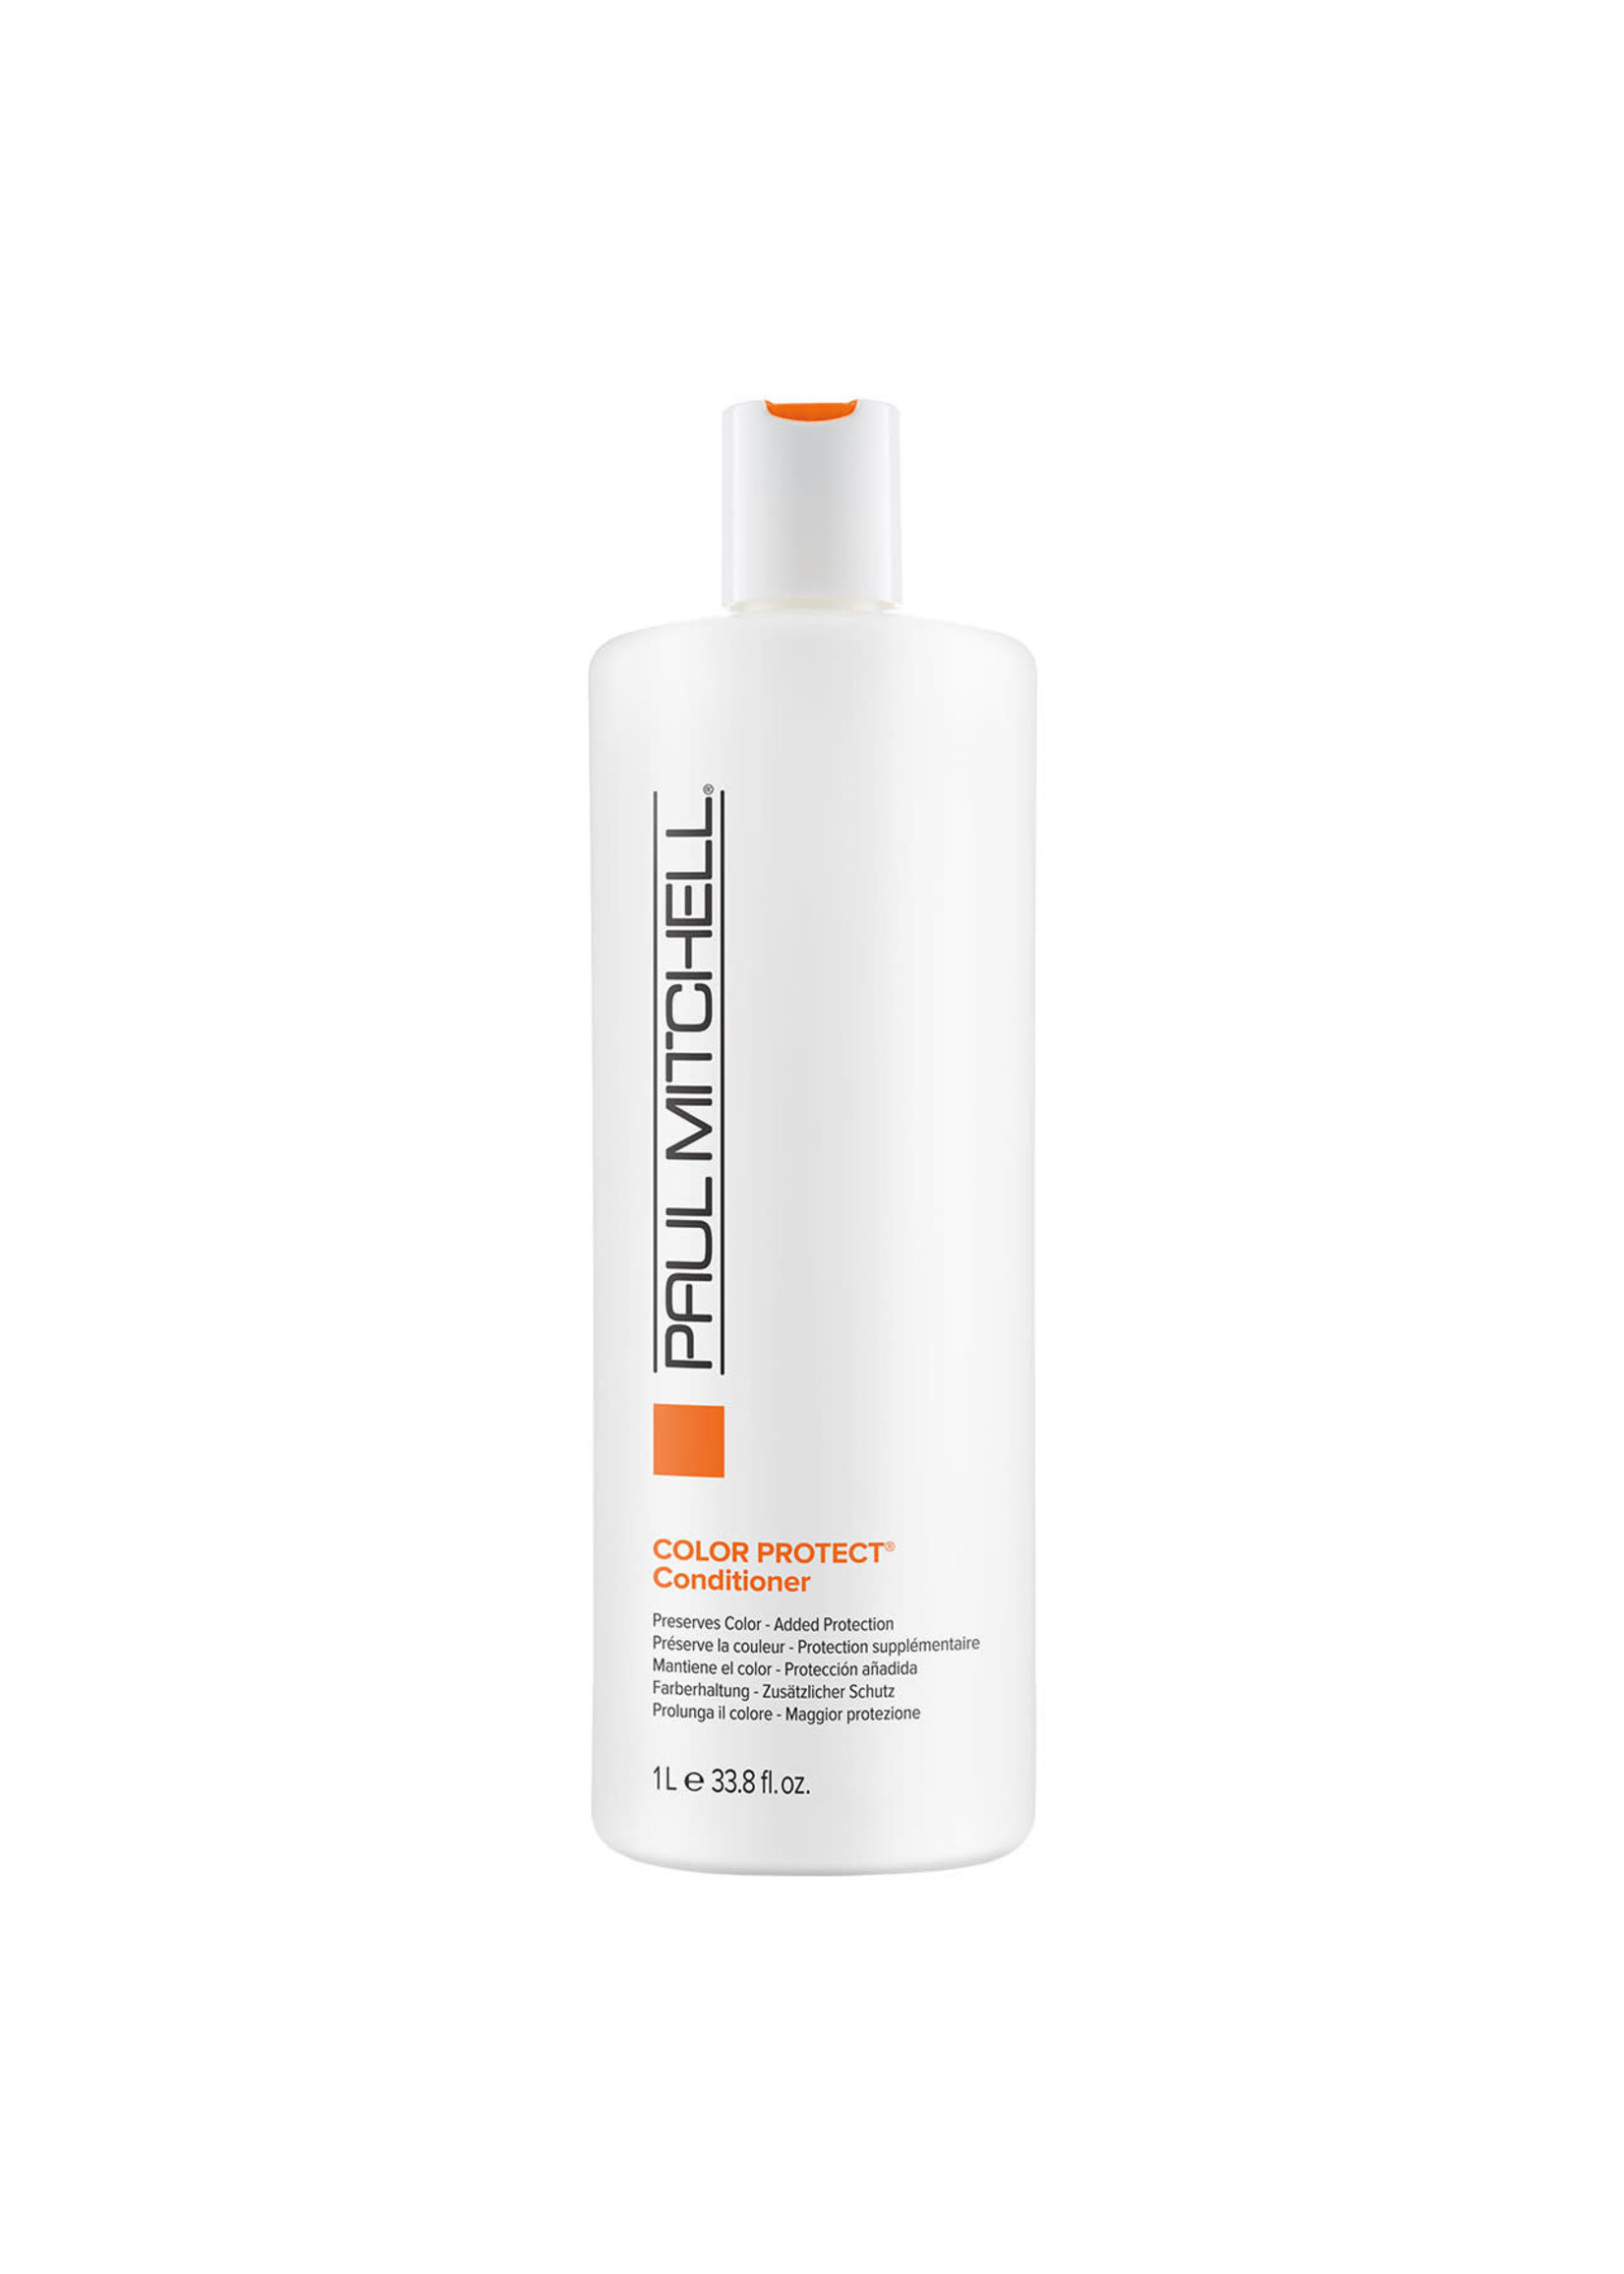 Paul Mitchell Paul Mitchell Color Protect Conditioner 1L